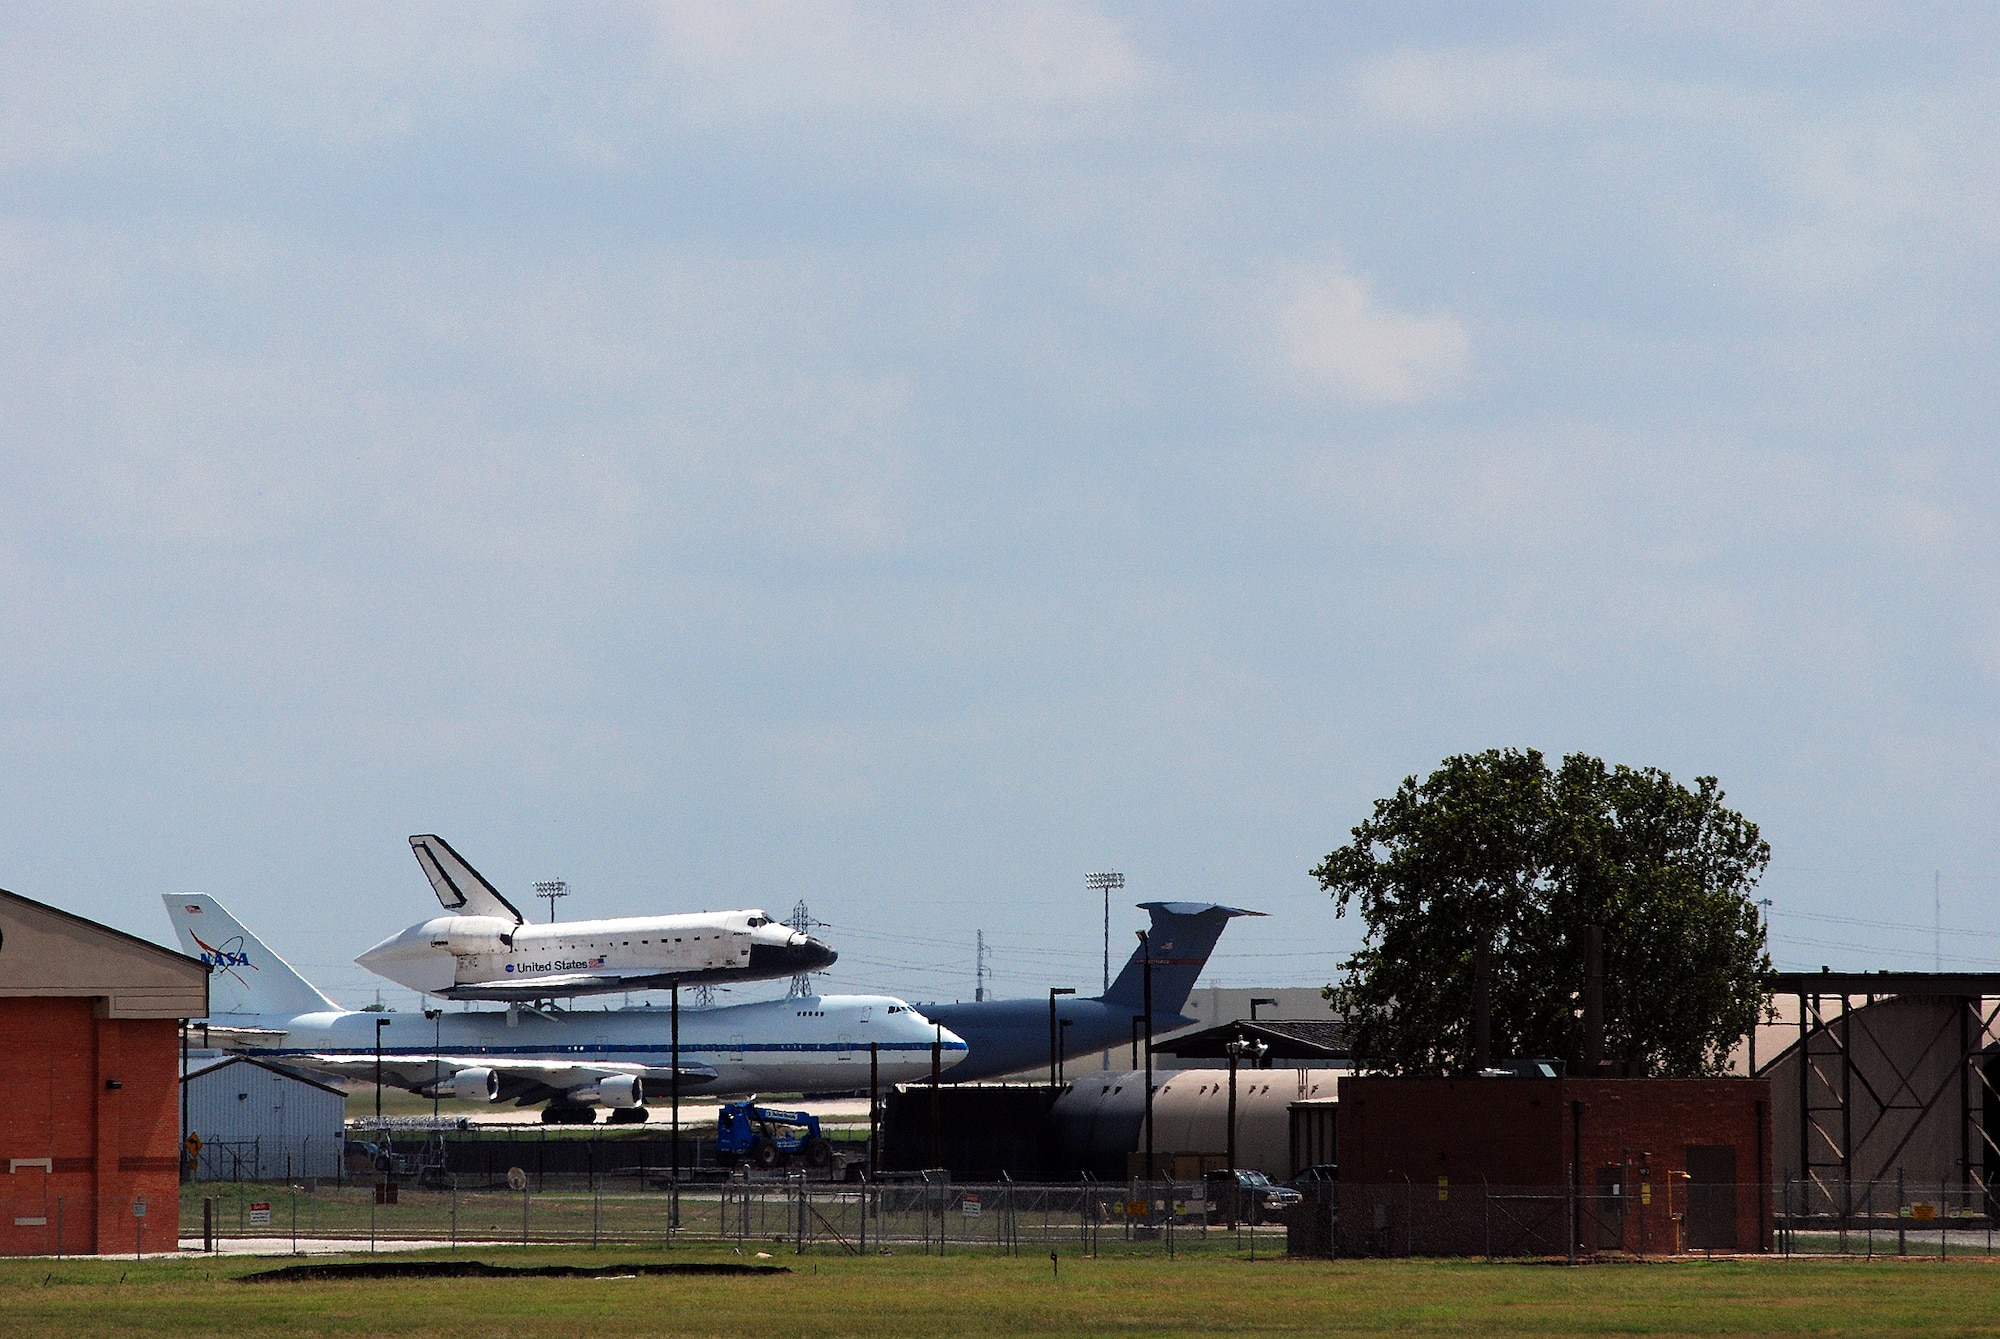 Space Shuttle Atlantis made a pit-stop, to a parking area near the 433rd Airlift Wing at Lackland AFB, Texas, today (June 2, 2009). The shuttle is on its way home to Kennedy Space Center, Fla., from the landing site at Edwards AFB, Calif. According to Ms. Candrea Thomas, public affairs officer at NASA's Kennedy Space Center, Atlantis was returning from "STS Mission 125" where the crew serviced and upgraded the Hubble Space Telescope on the International Space Station. Weather caused a delay and relocation of the landing site. After landing at Edwards AFB, Atlantis was "piggybacked" onto a modified Boeing 747 called a shuttle carrier. The 747 then flew from Edwards to El Paso, Texas and spent the night waiting for severe thunder storms to pass. Next stop was the Lackland AFB flight line. The shuttle carrier took on fuel while parked near the Alamo Wing"s C-5 Galaxy parking ramp. From here, the shuttle plans a stop in Columbus, Ohio and is expected back in Florida early in the evening.  (U.S. Air Force Photo/Airman Brian McGloin)